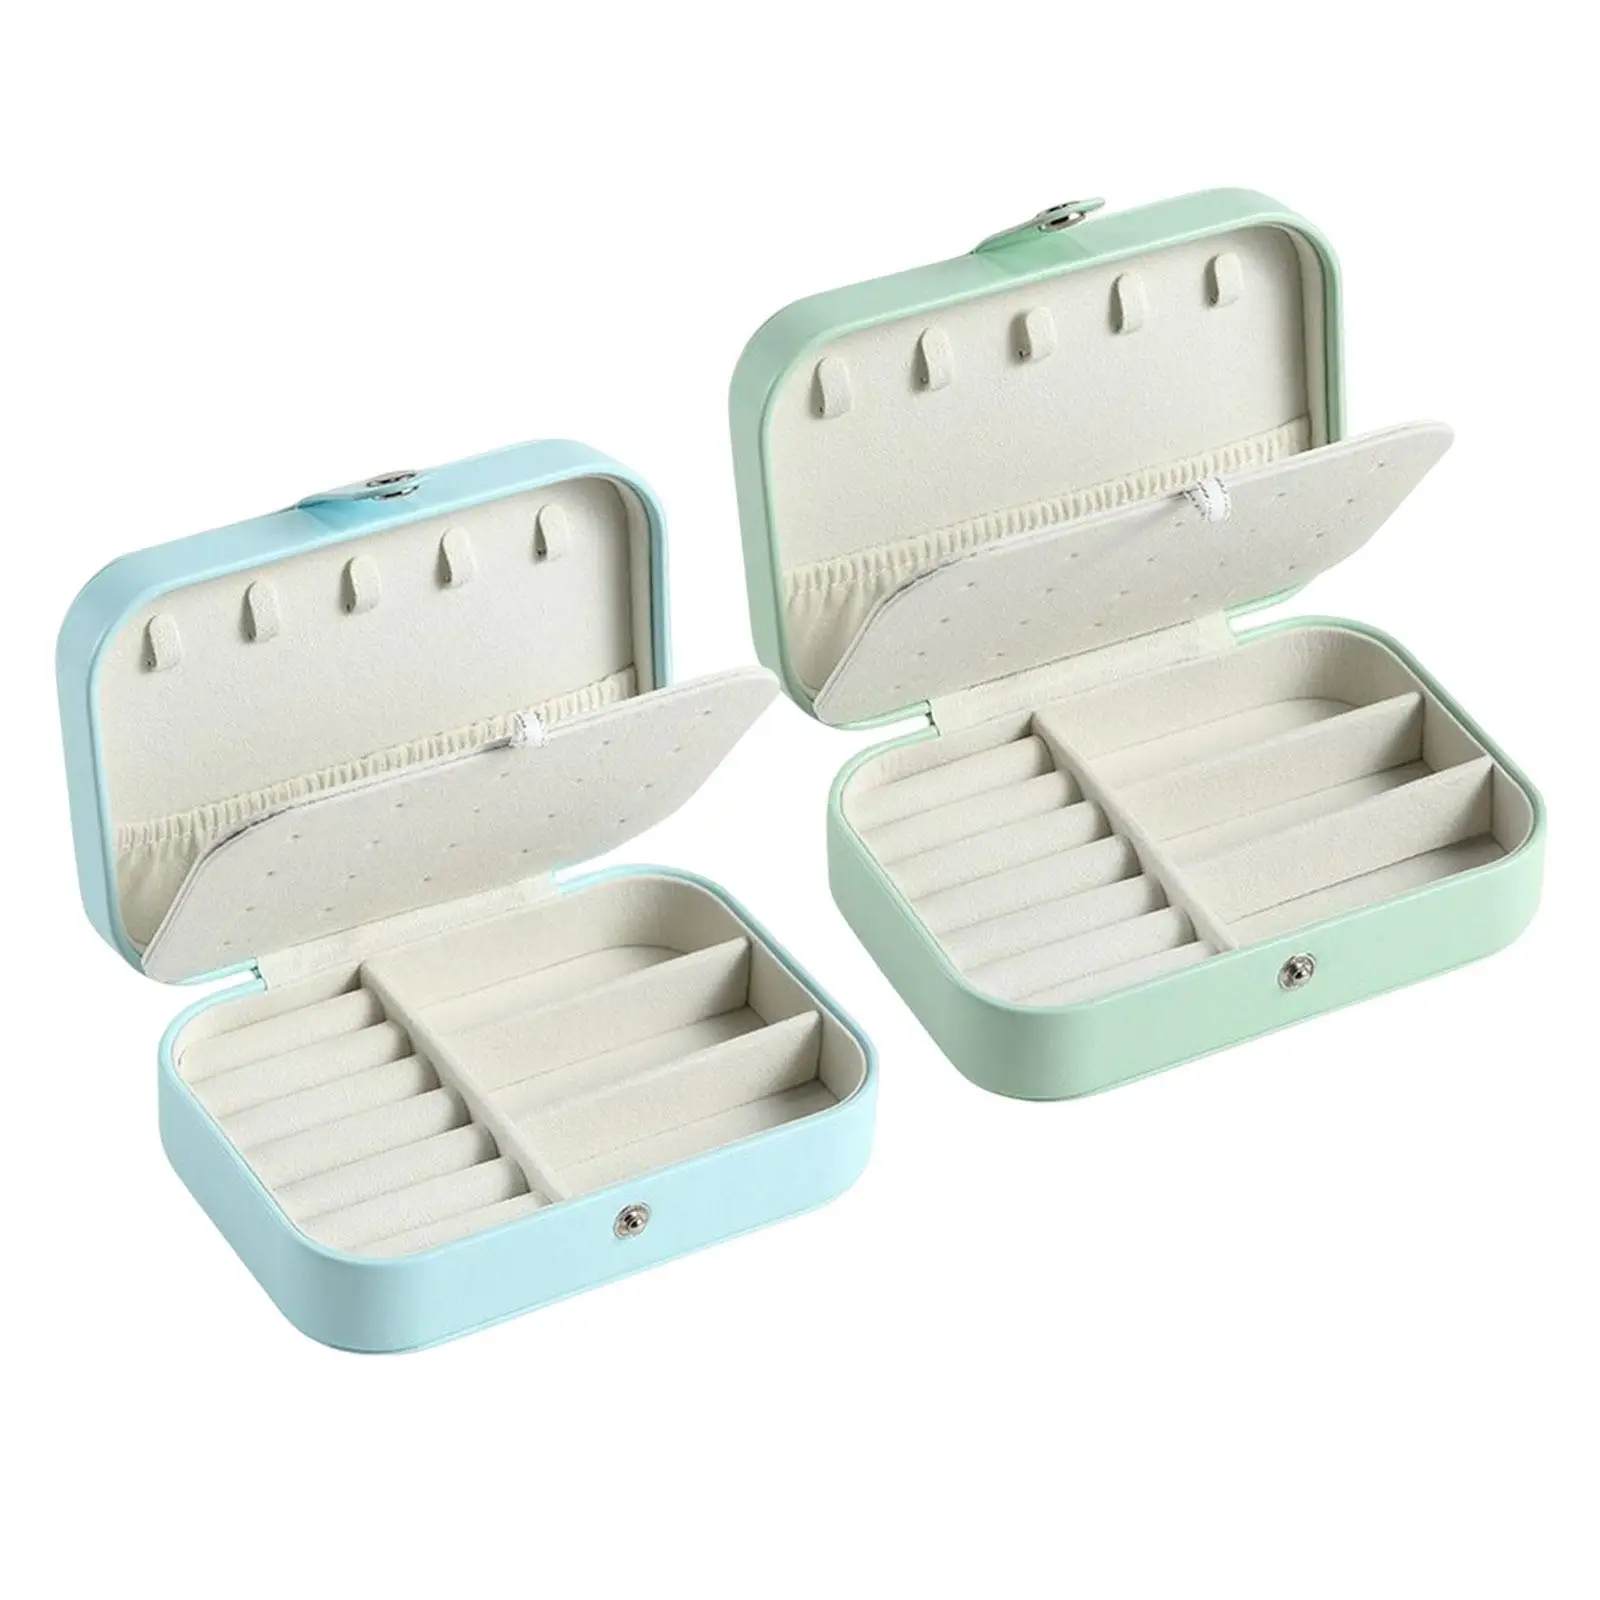 Small Travel Jewelry Box Gift Double Layer Dustproof Storage Case Organizer Holder for Rings Necklaces Ear Studs Bracelets Girls